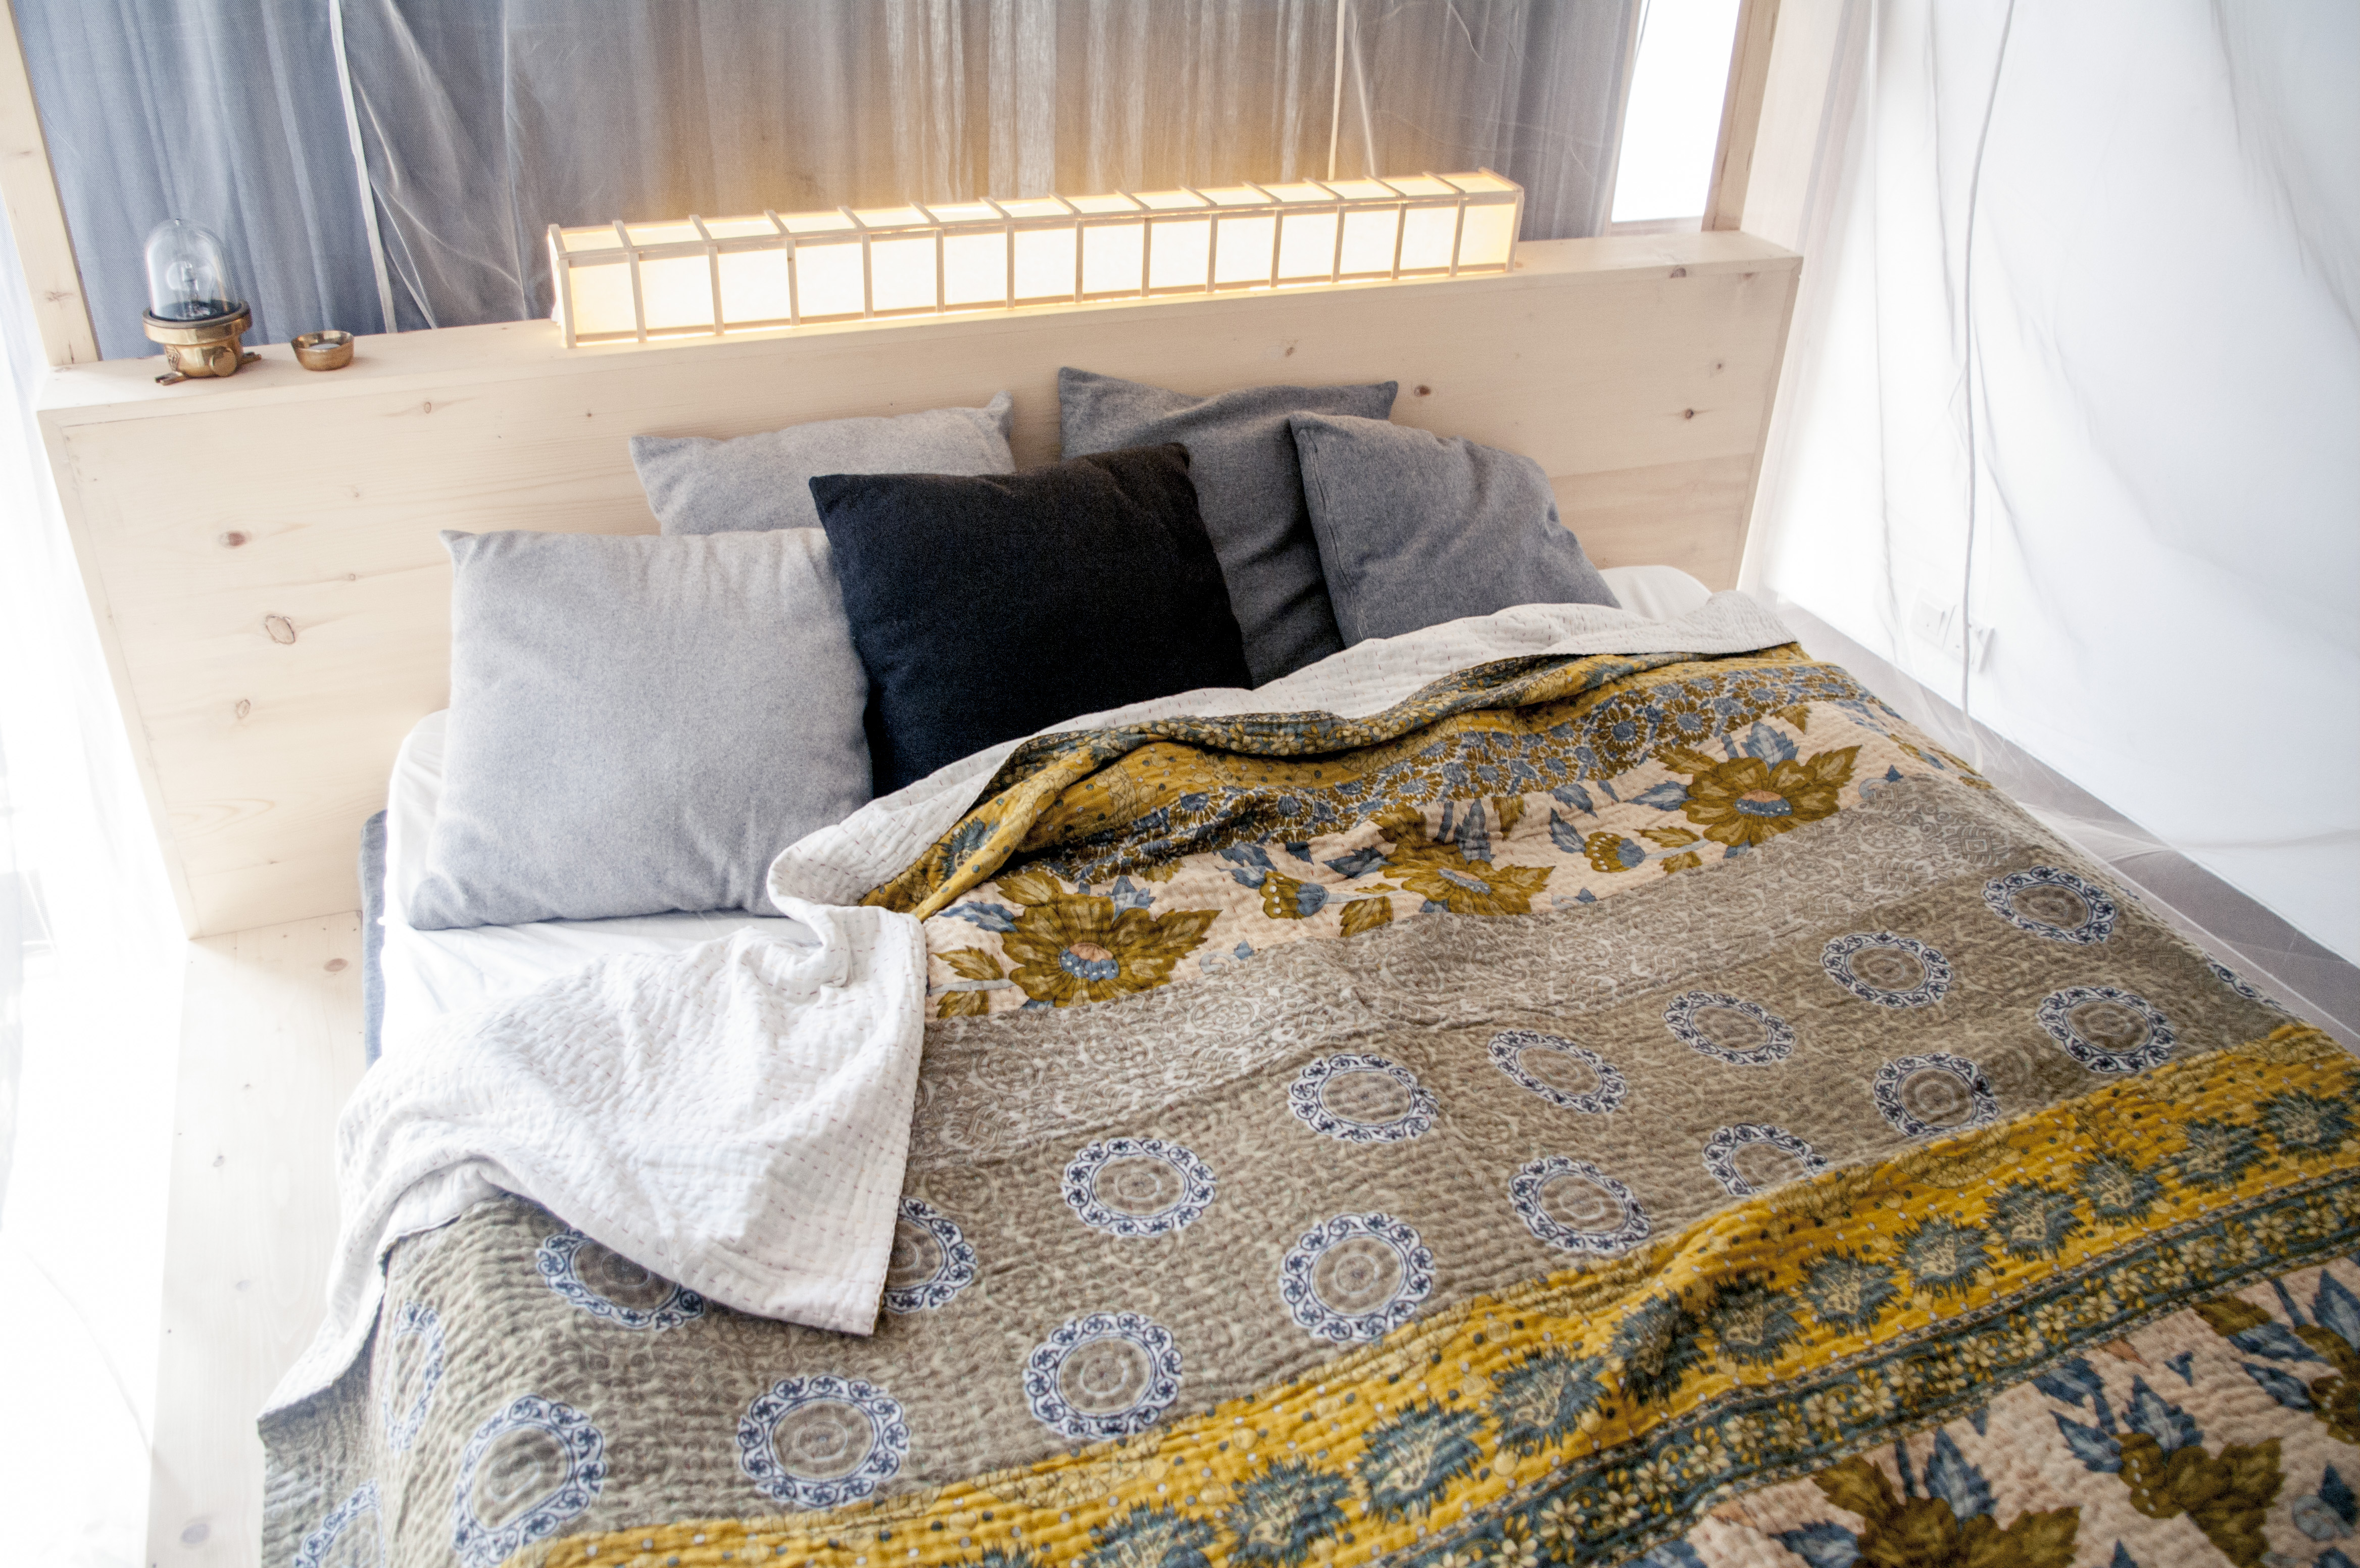 Colorful Kantha sewn bedspread on a king sized bed